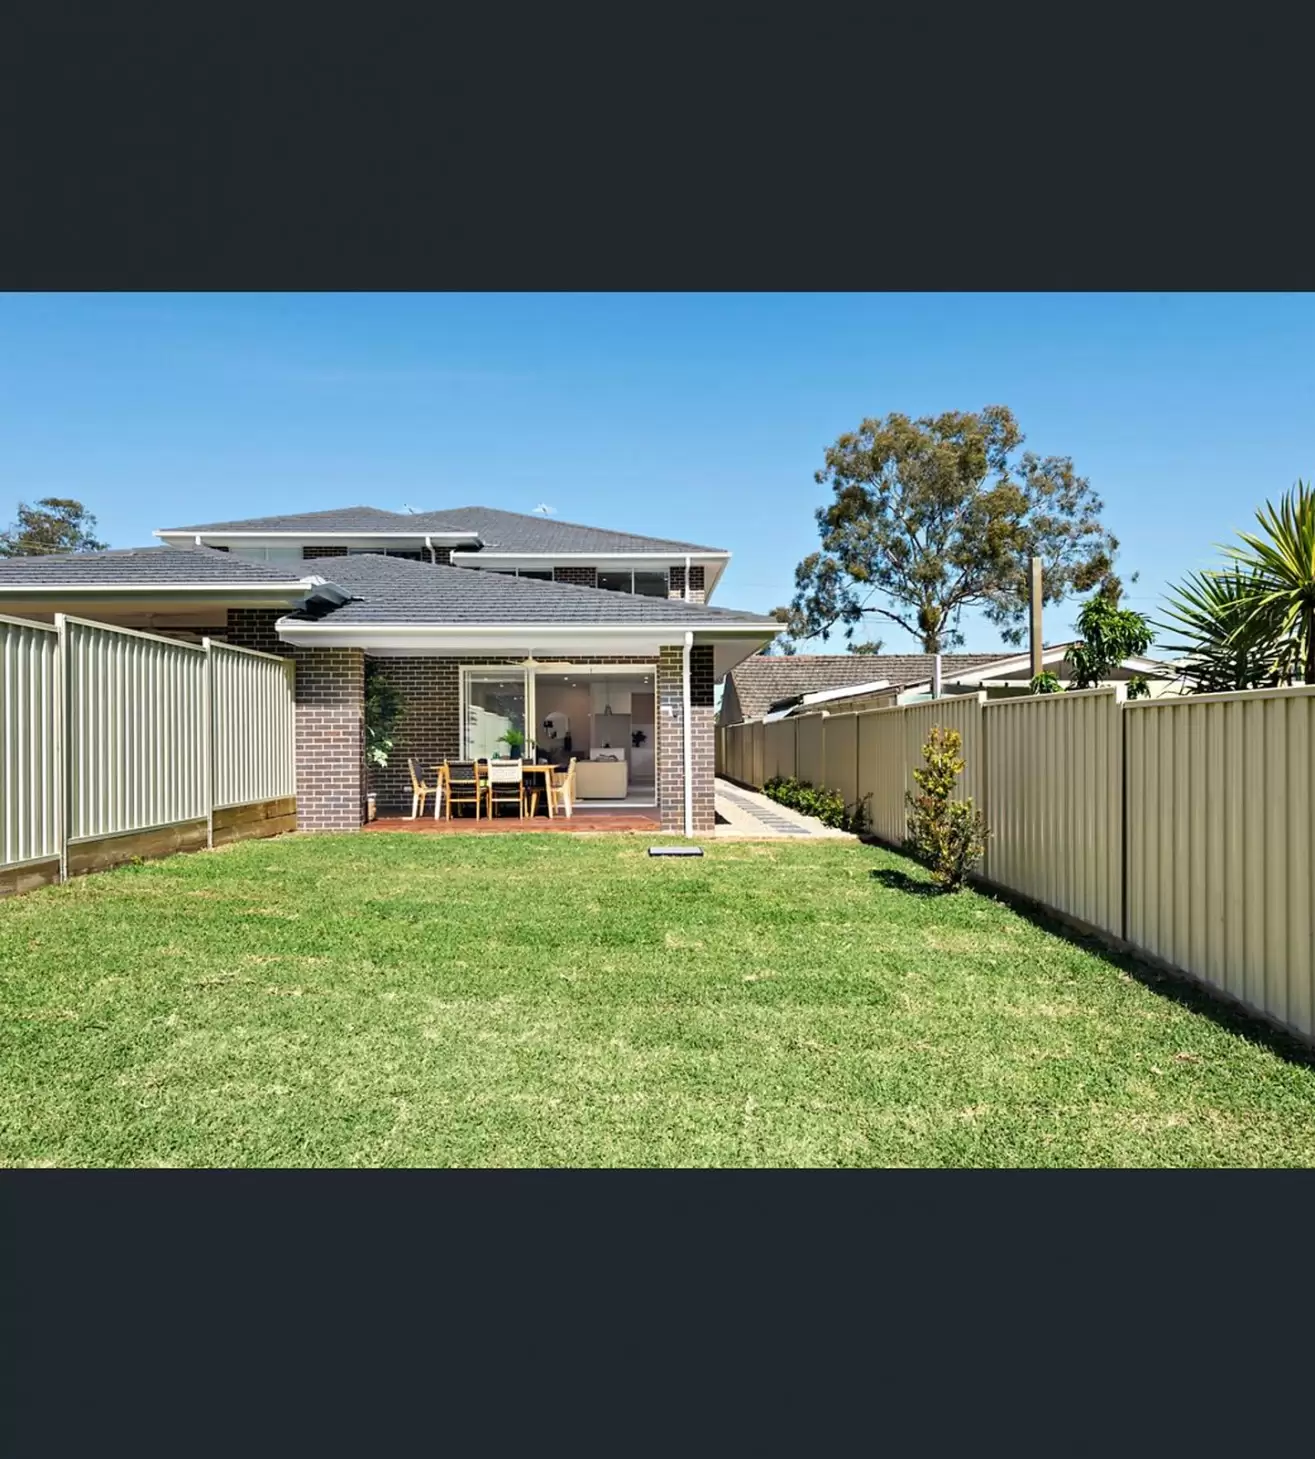 Photo #9: 119a Kirby Street, Rydalmere - Sold by Sydney Sotheby's International Realty